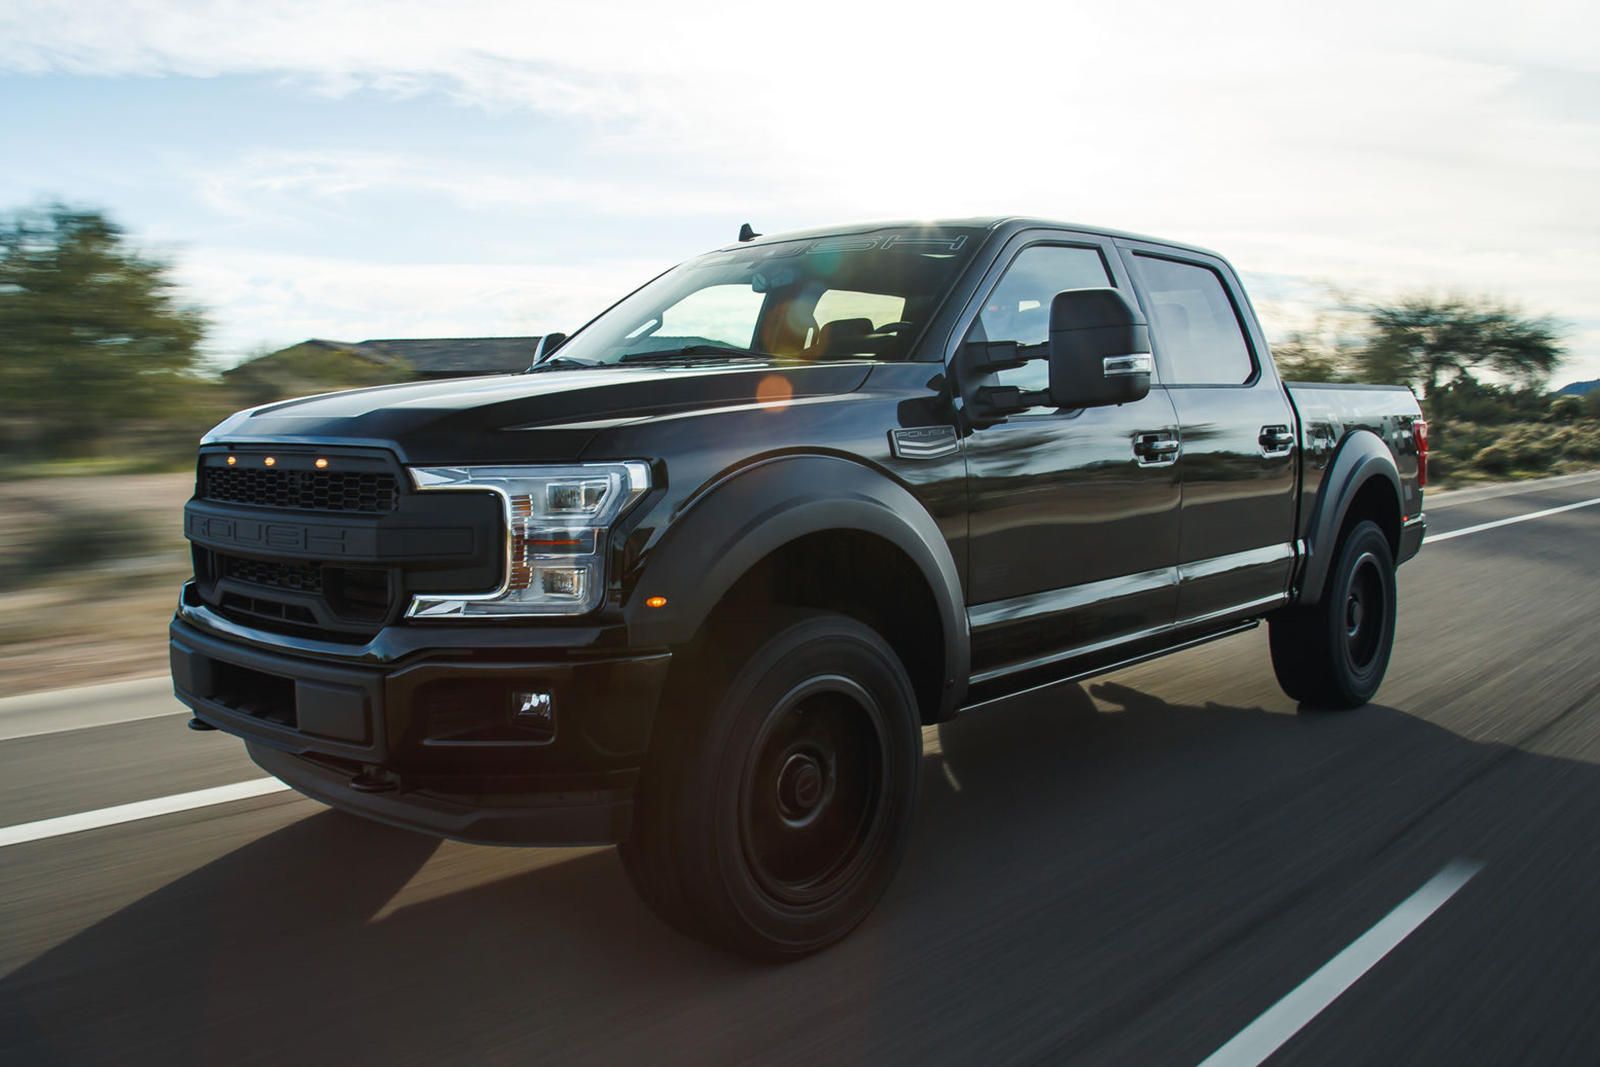 2020 Ford F-150 5.11 Tactical Edition by Roush Performance